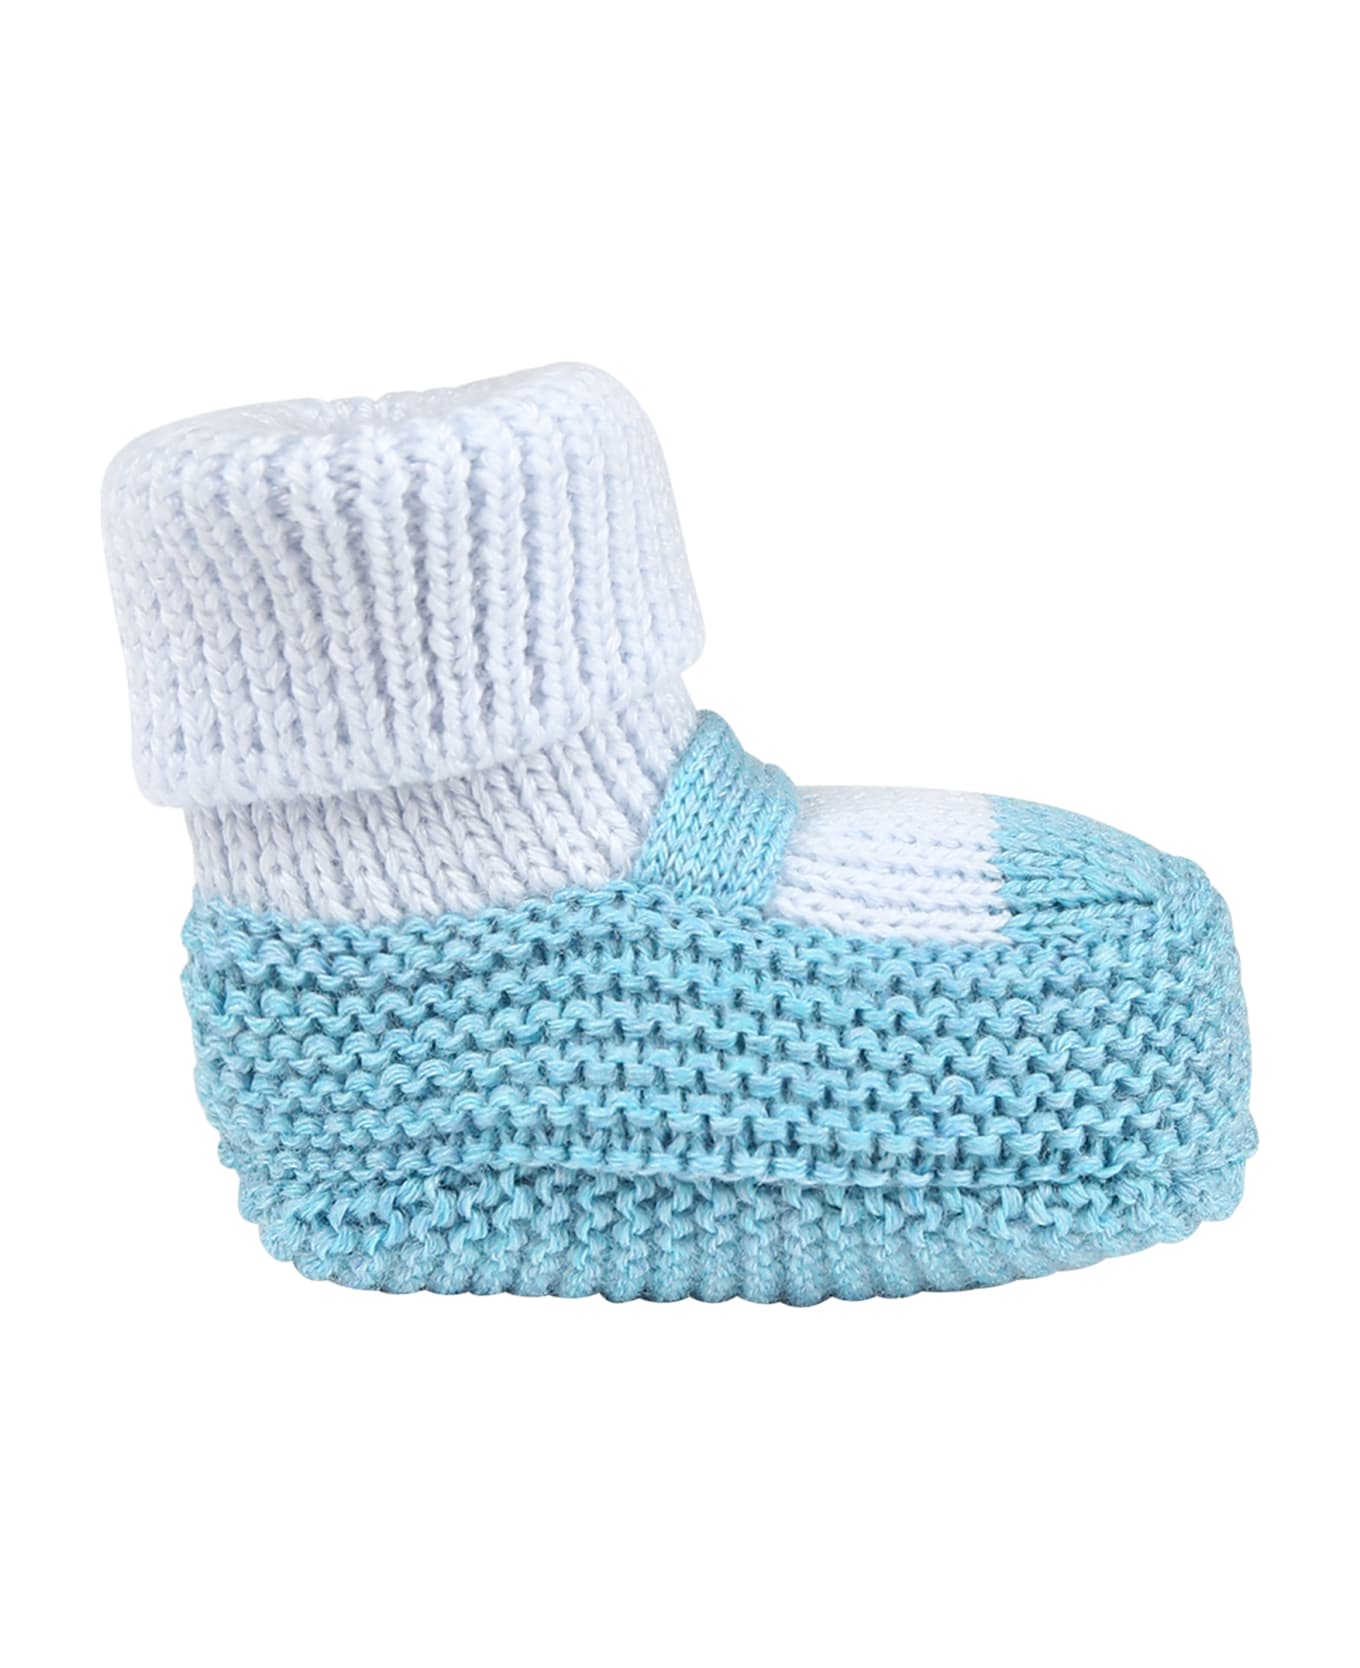 Little Bear Light Blue Slippers For Baby Boy - Multicolor アクセサリー＆ギフト